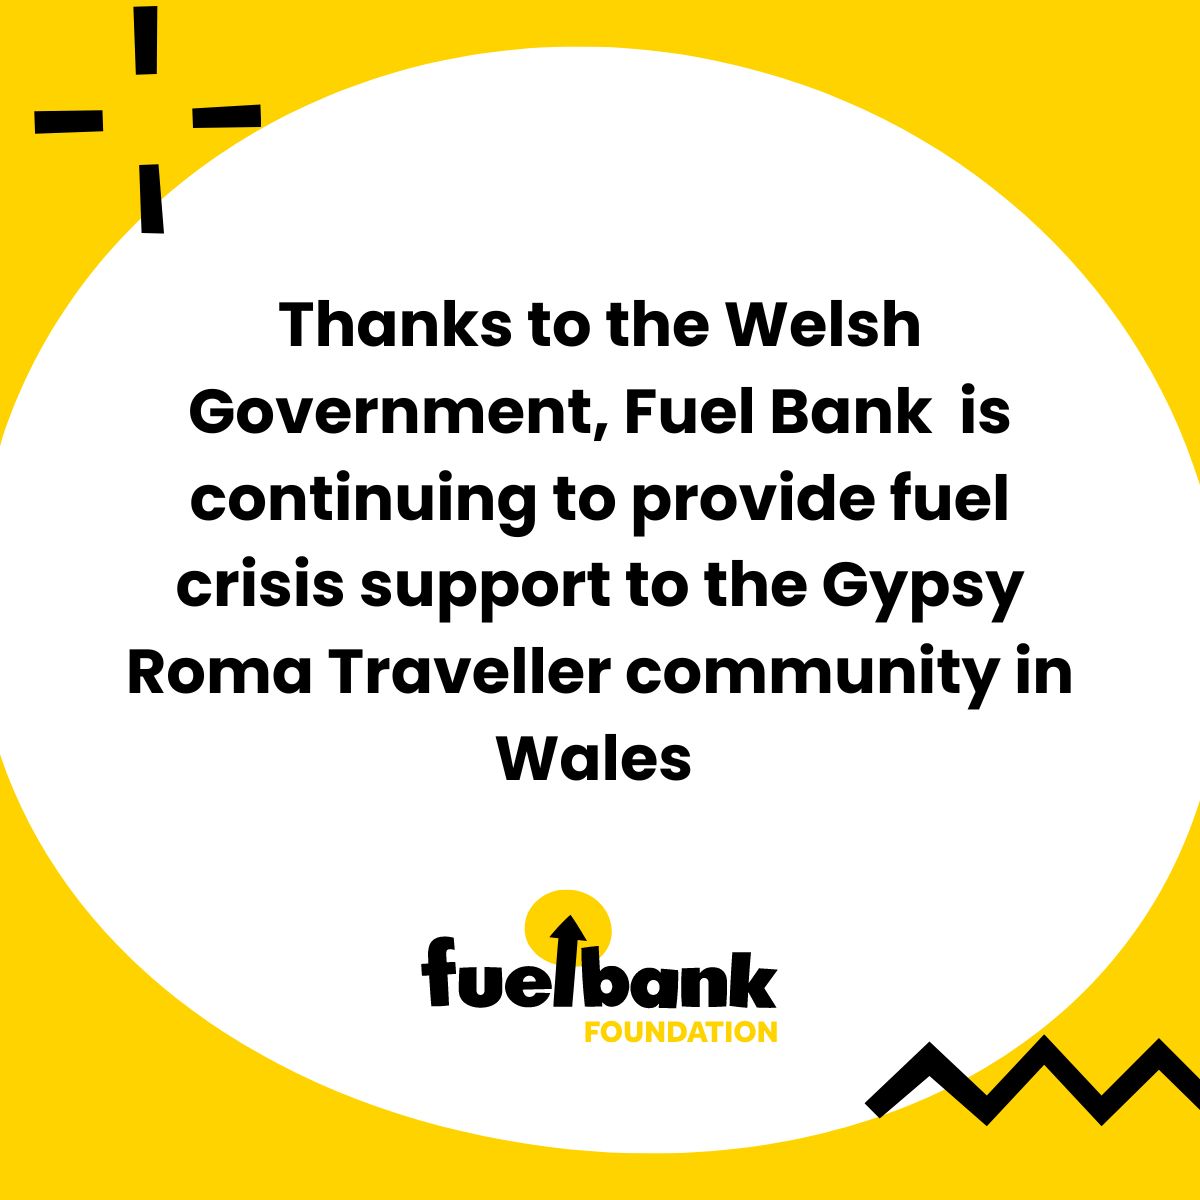 We're pleased to be able to provide further fuel crisis support for the Gypsy Roma Traveller community in Wales, as part of @GovWales's Anti-racist Wales Action Plan. Learn more: gov.wales/written-statem… #FuelCrisis #FuelPoverty